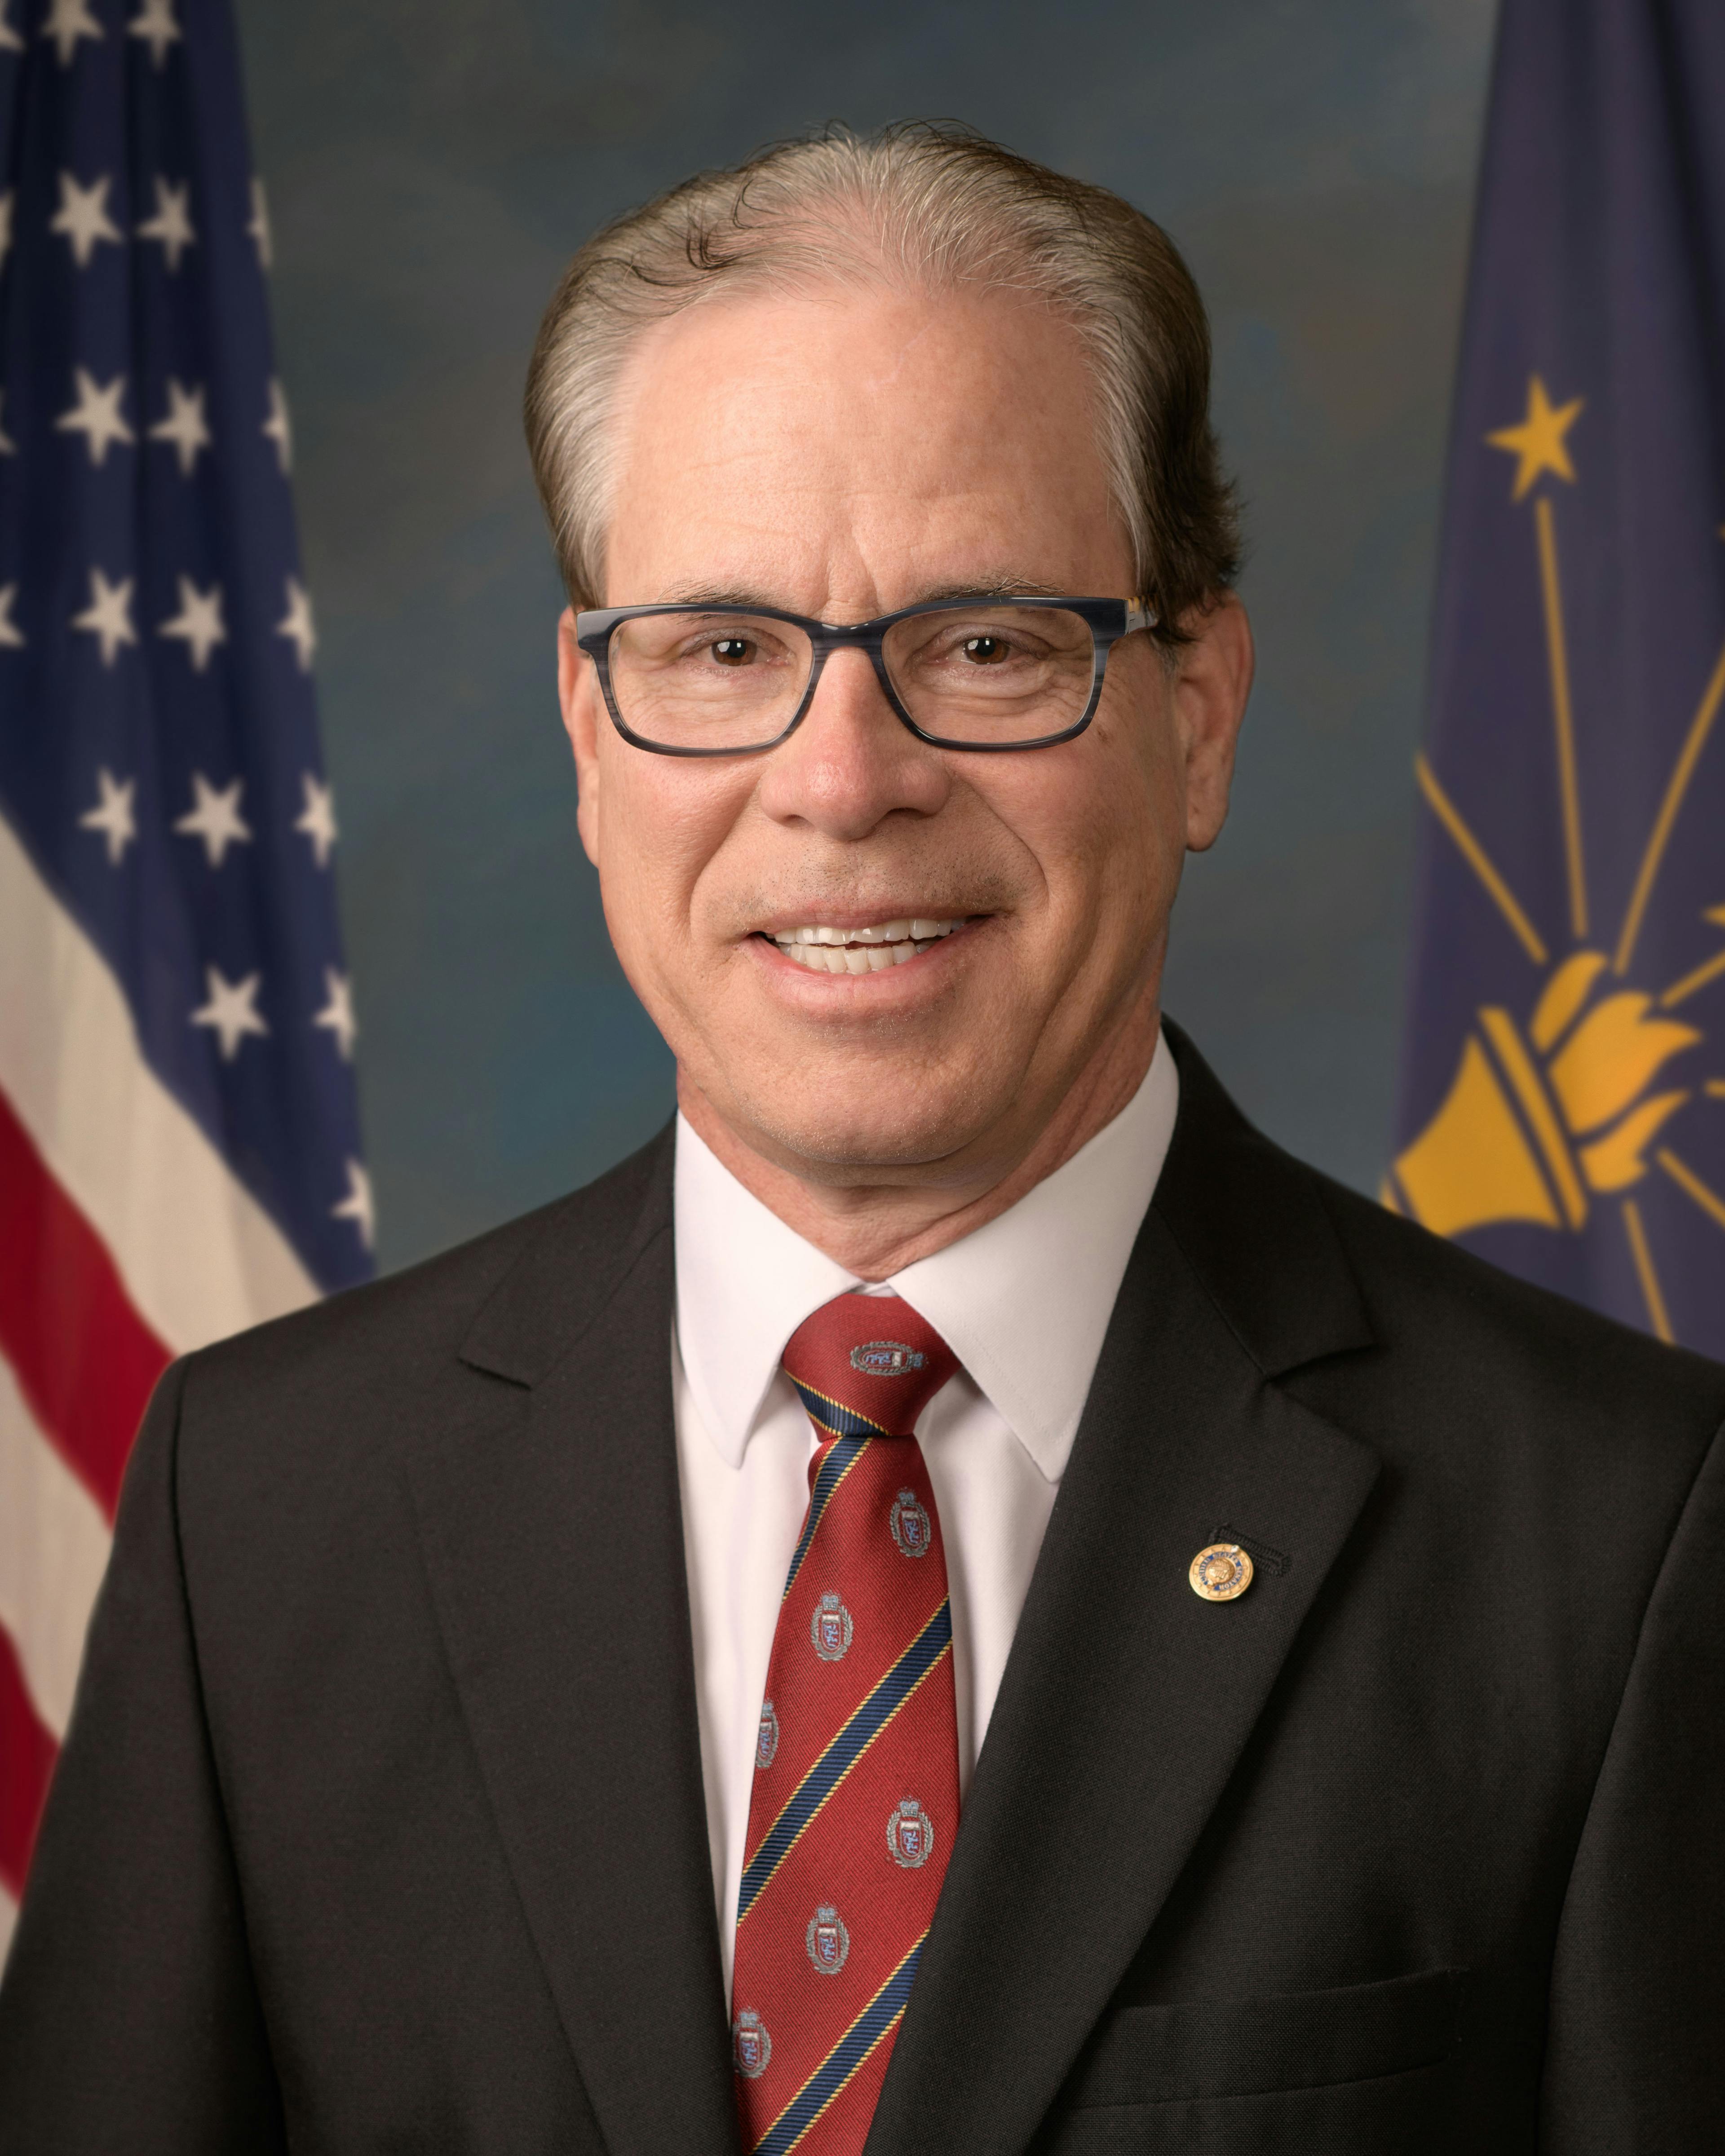 Profile picture of Mike Braun